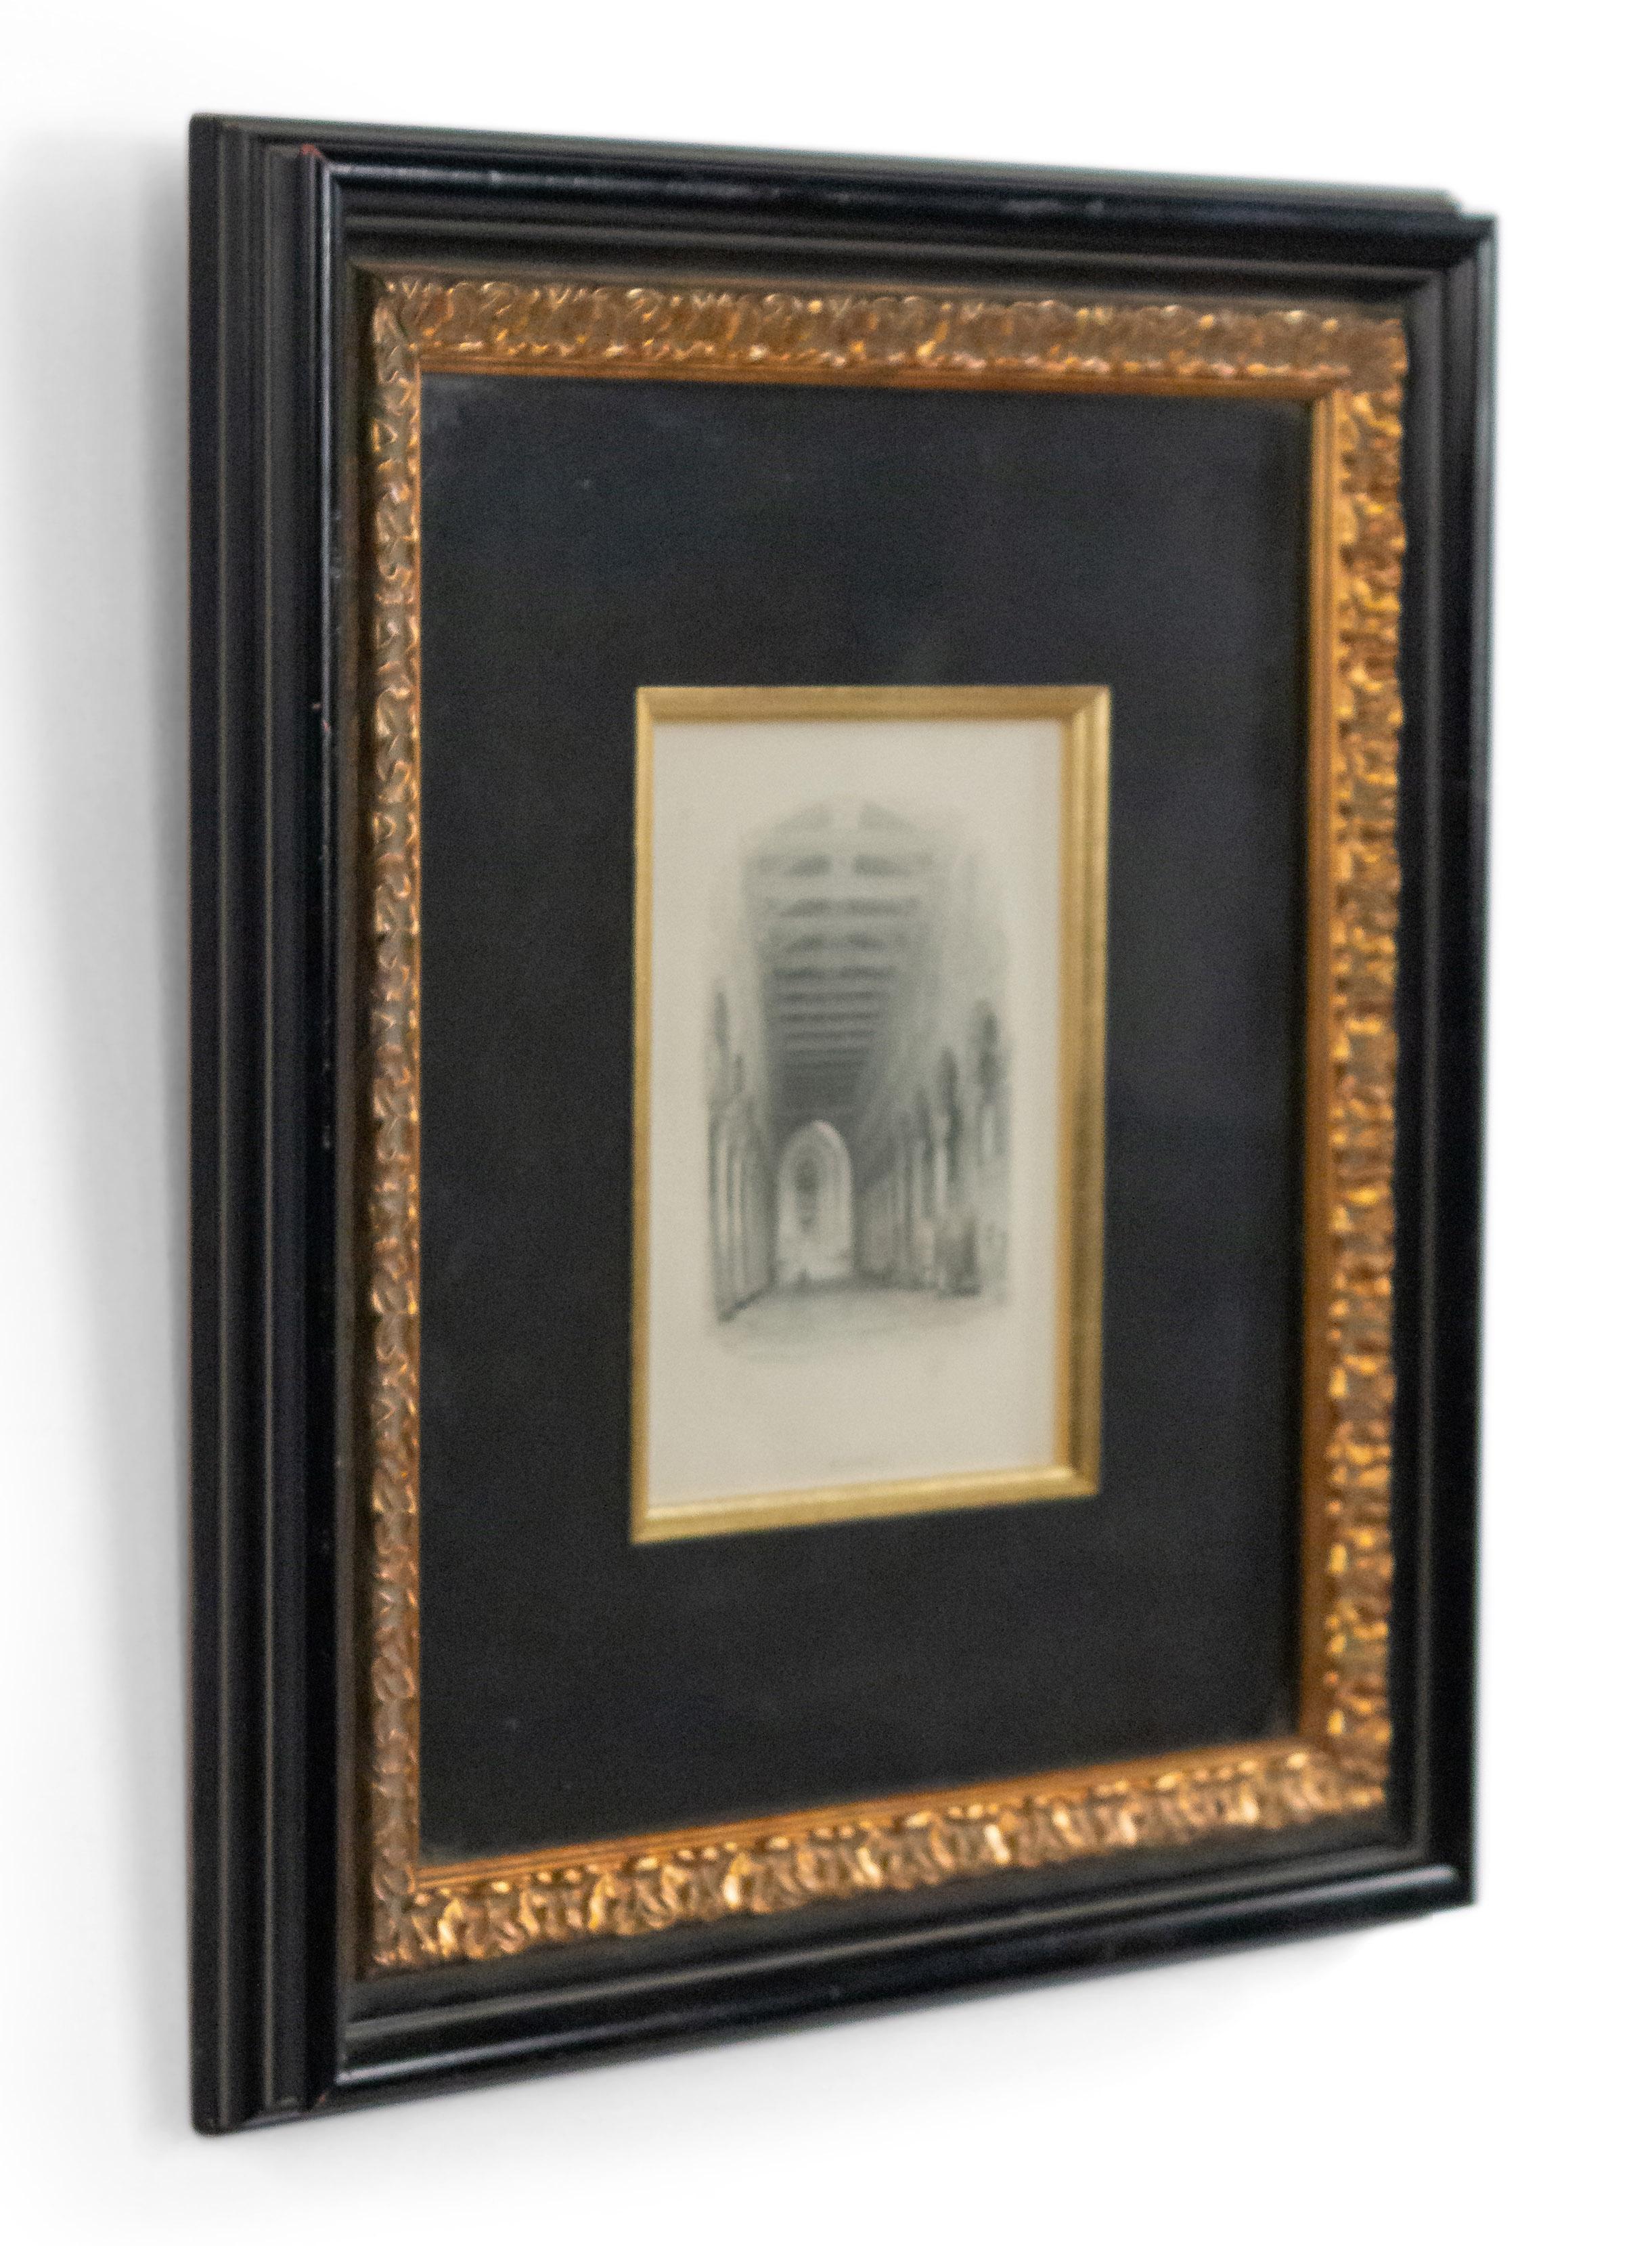 British English Steel Plate Engraving of a Cathedral For Sale